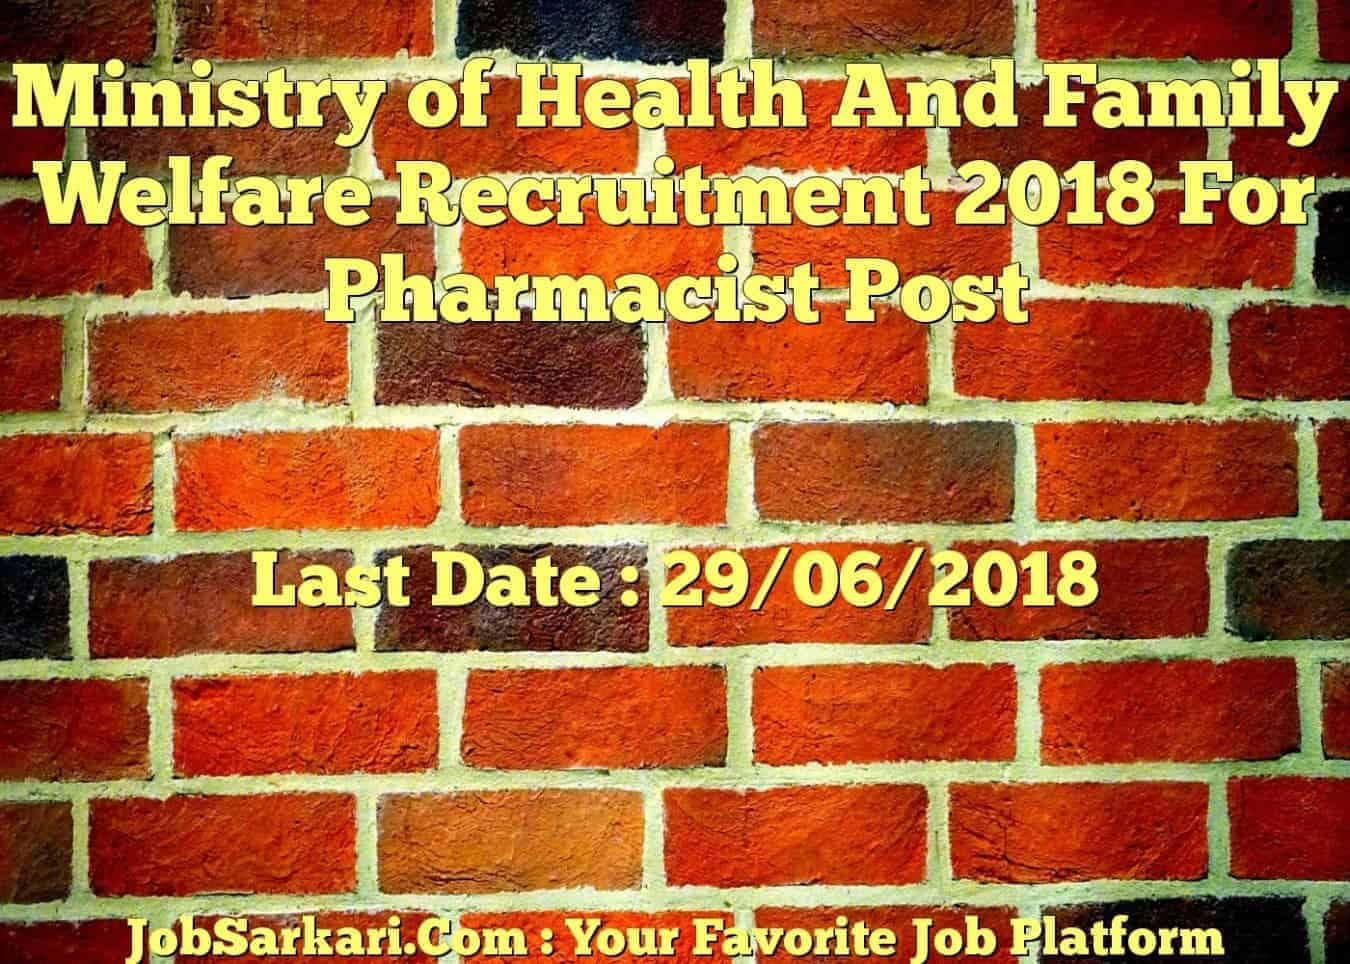 Ministry of Health And Family Welfare Recruitment 2018 For Pharmacist Post